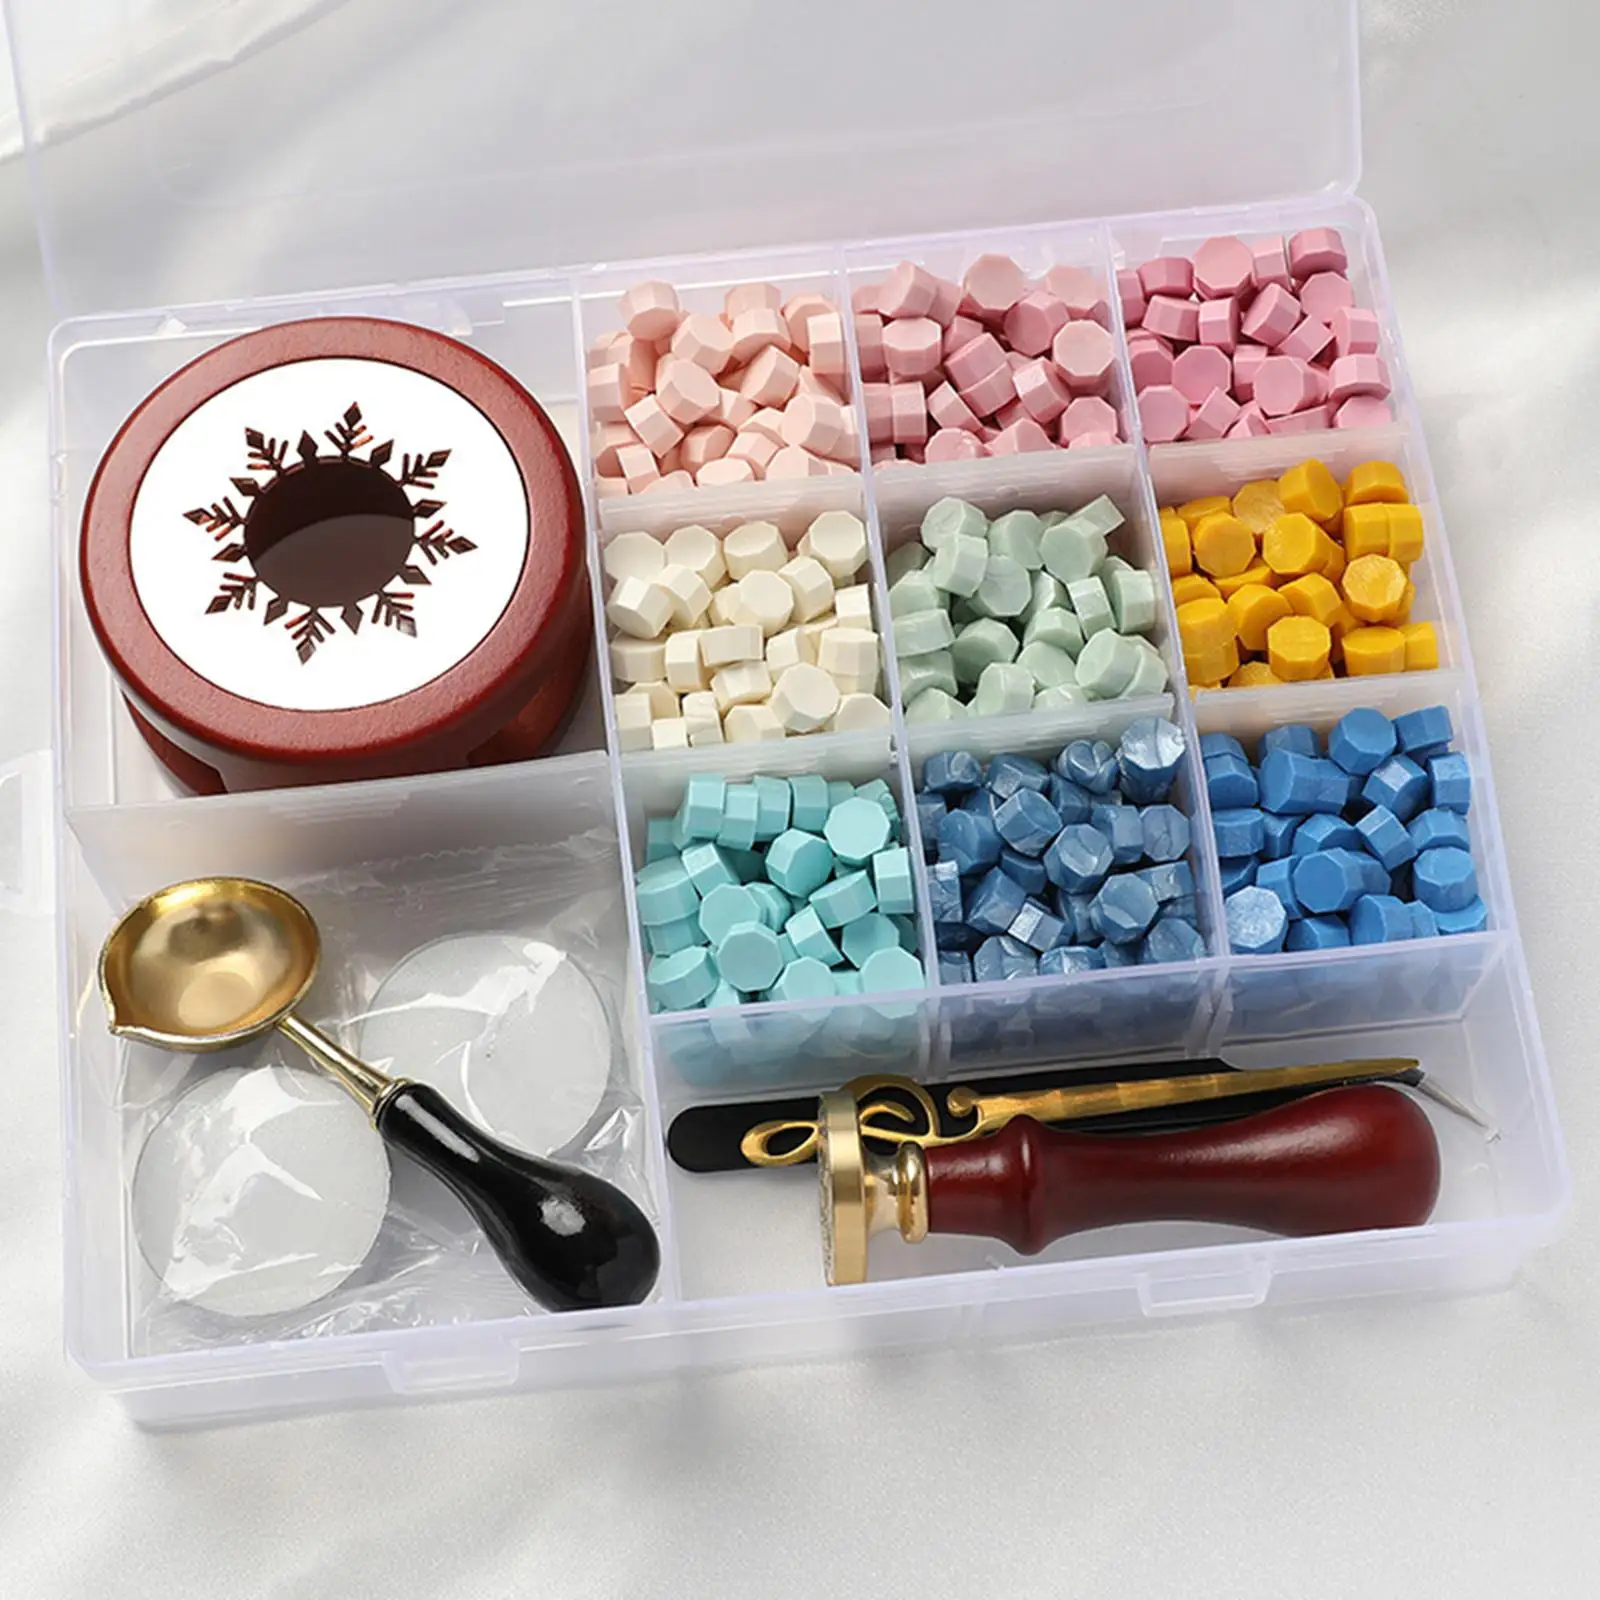 Wax Seal Kit W/Wax Seal Beads DIY Sealing Wax Beads Kit for Decoration Wedding Invitations Crafts Letters Sealing Envelope Stamp